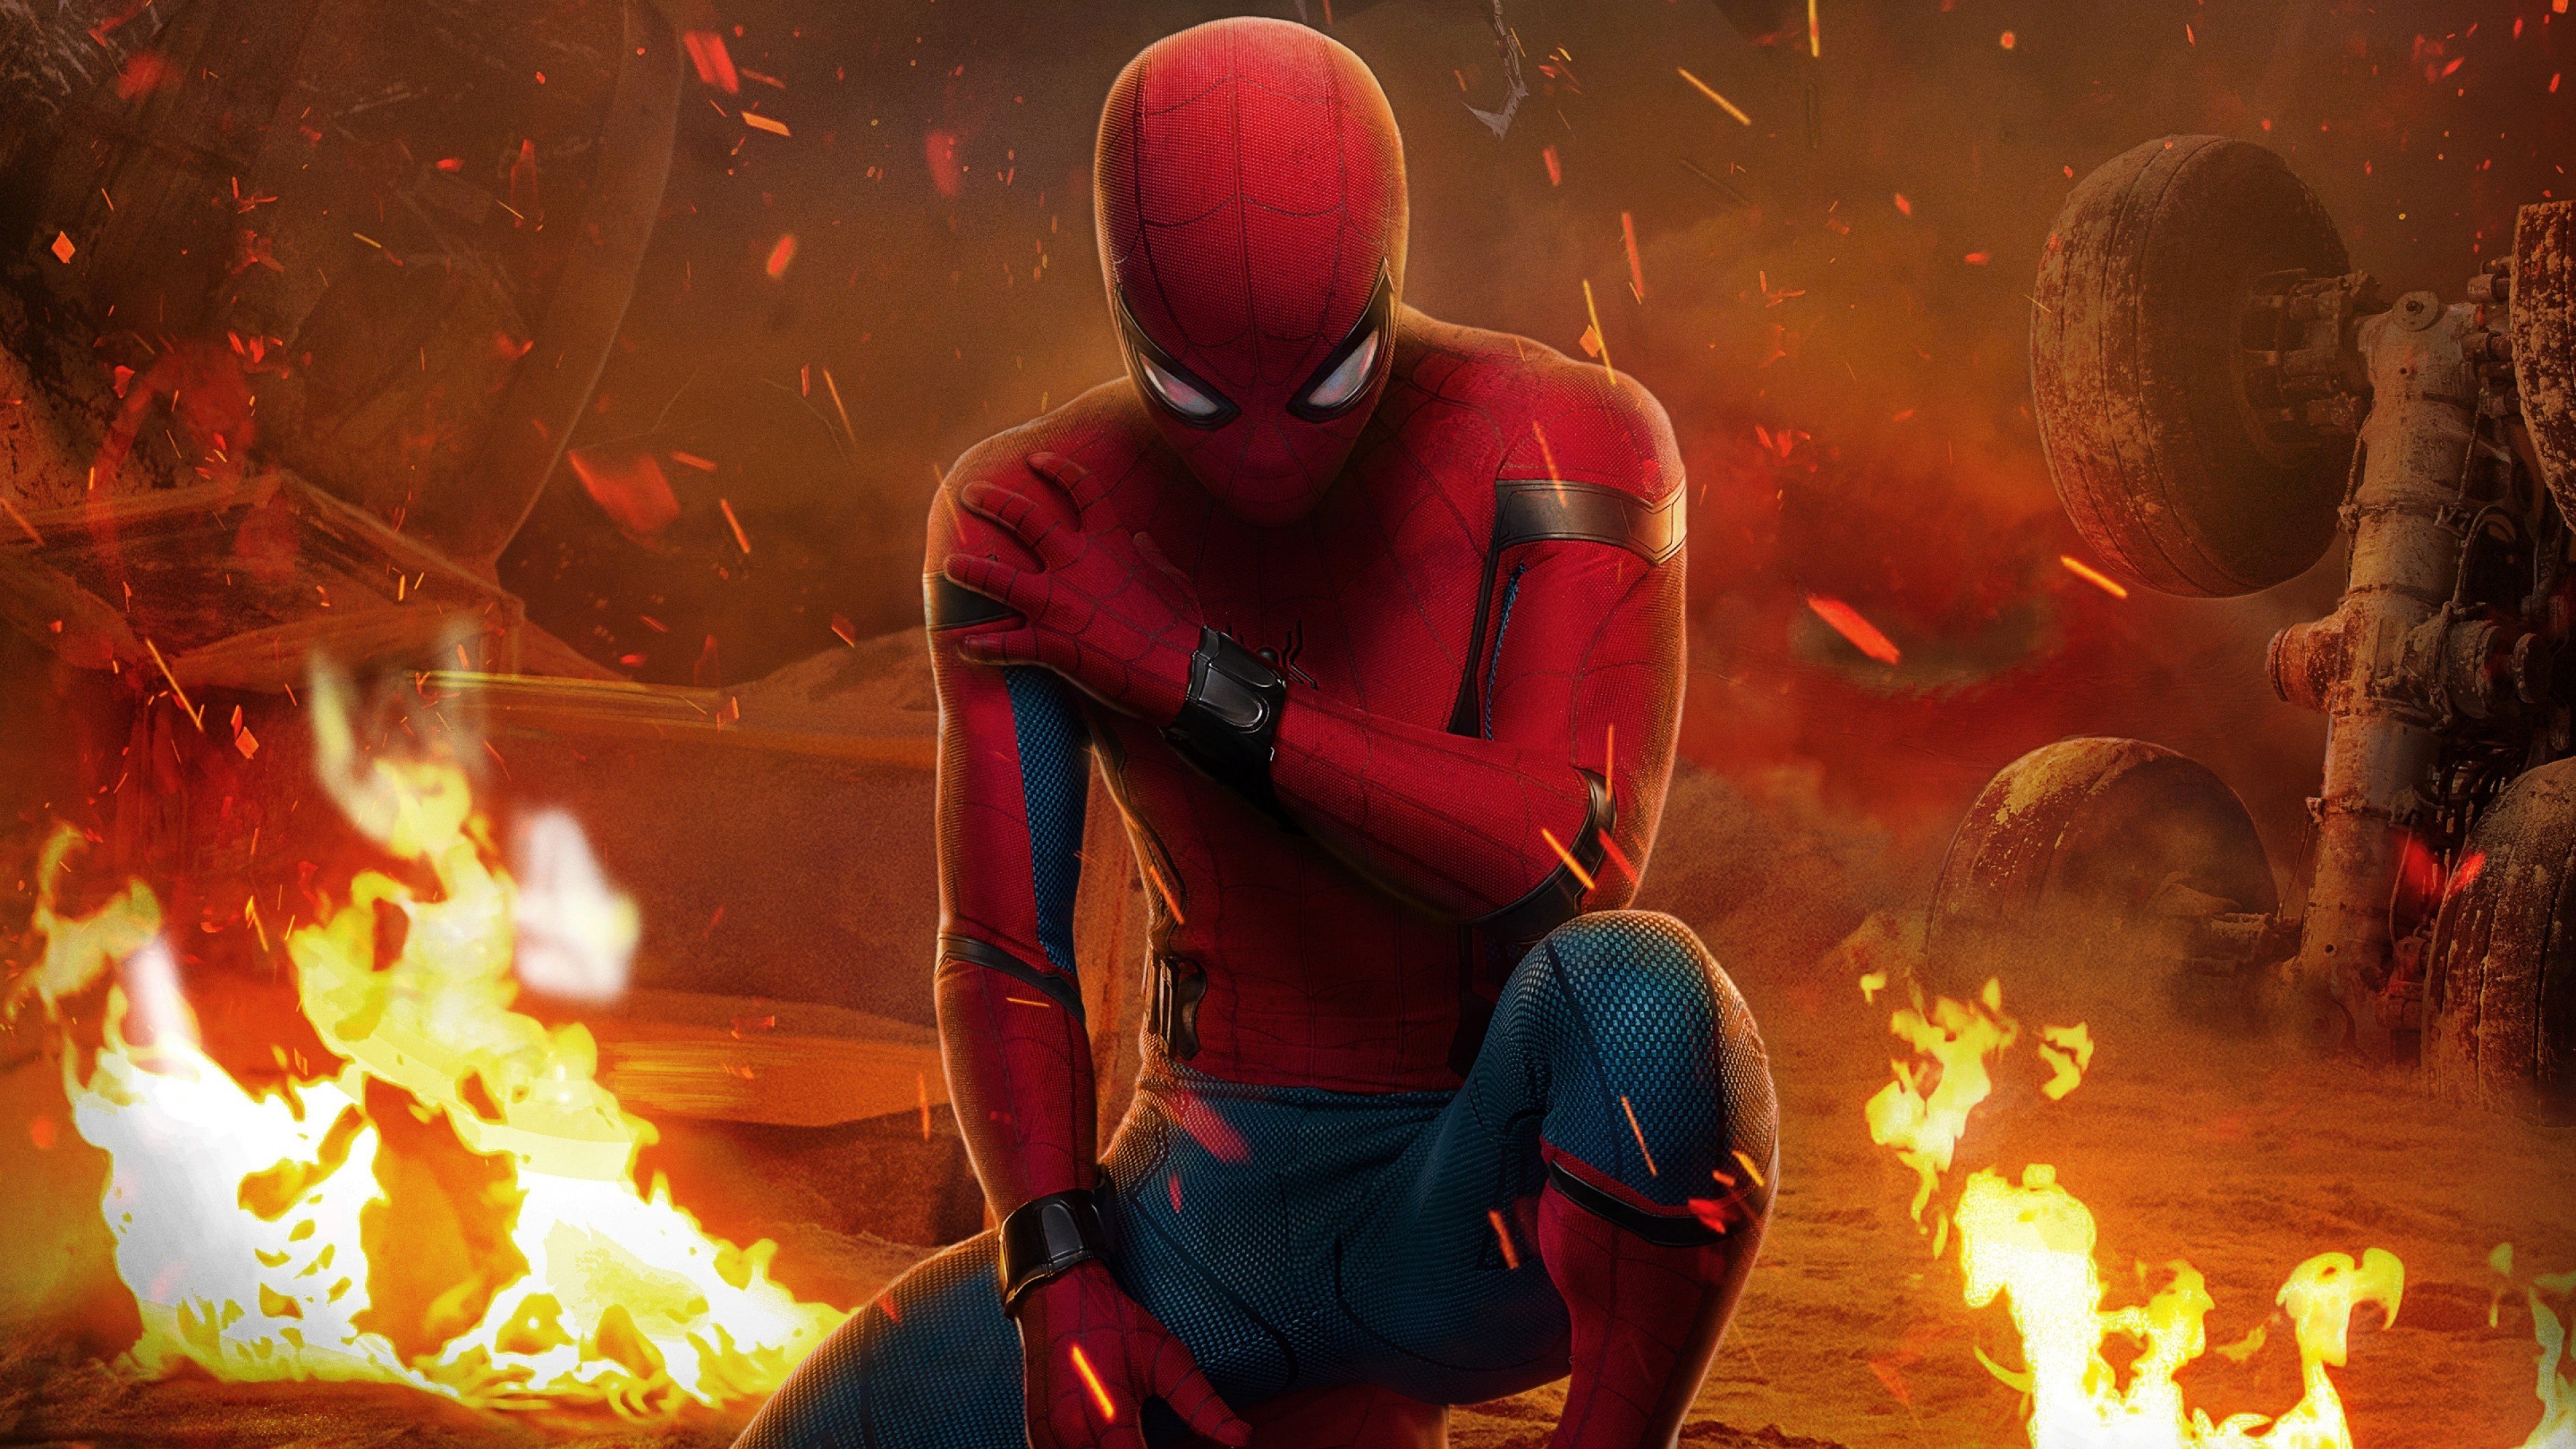 Download 3840x2160 Spider Man: Homecoming, Tom Holland Wallpaper